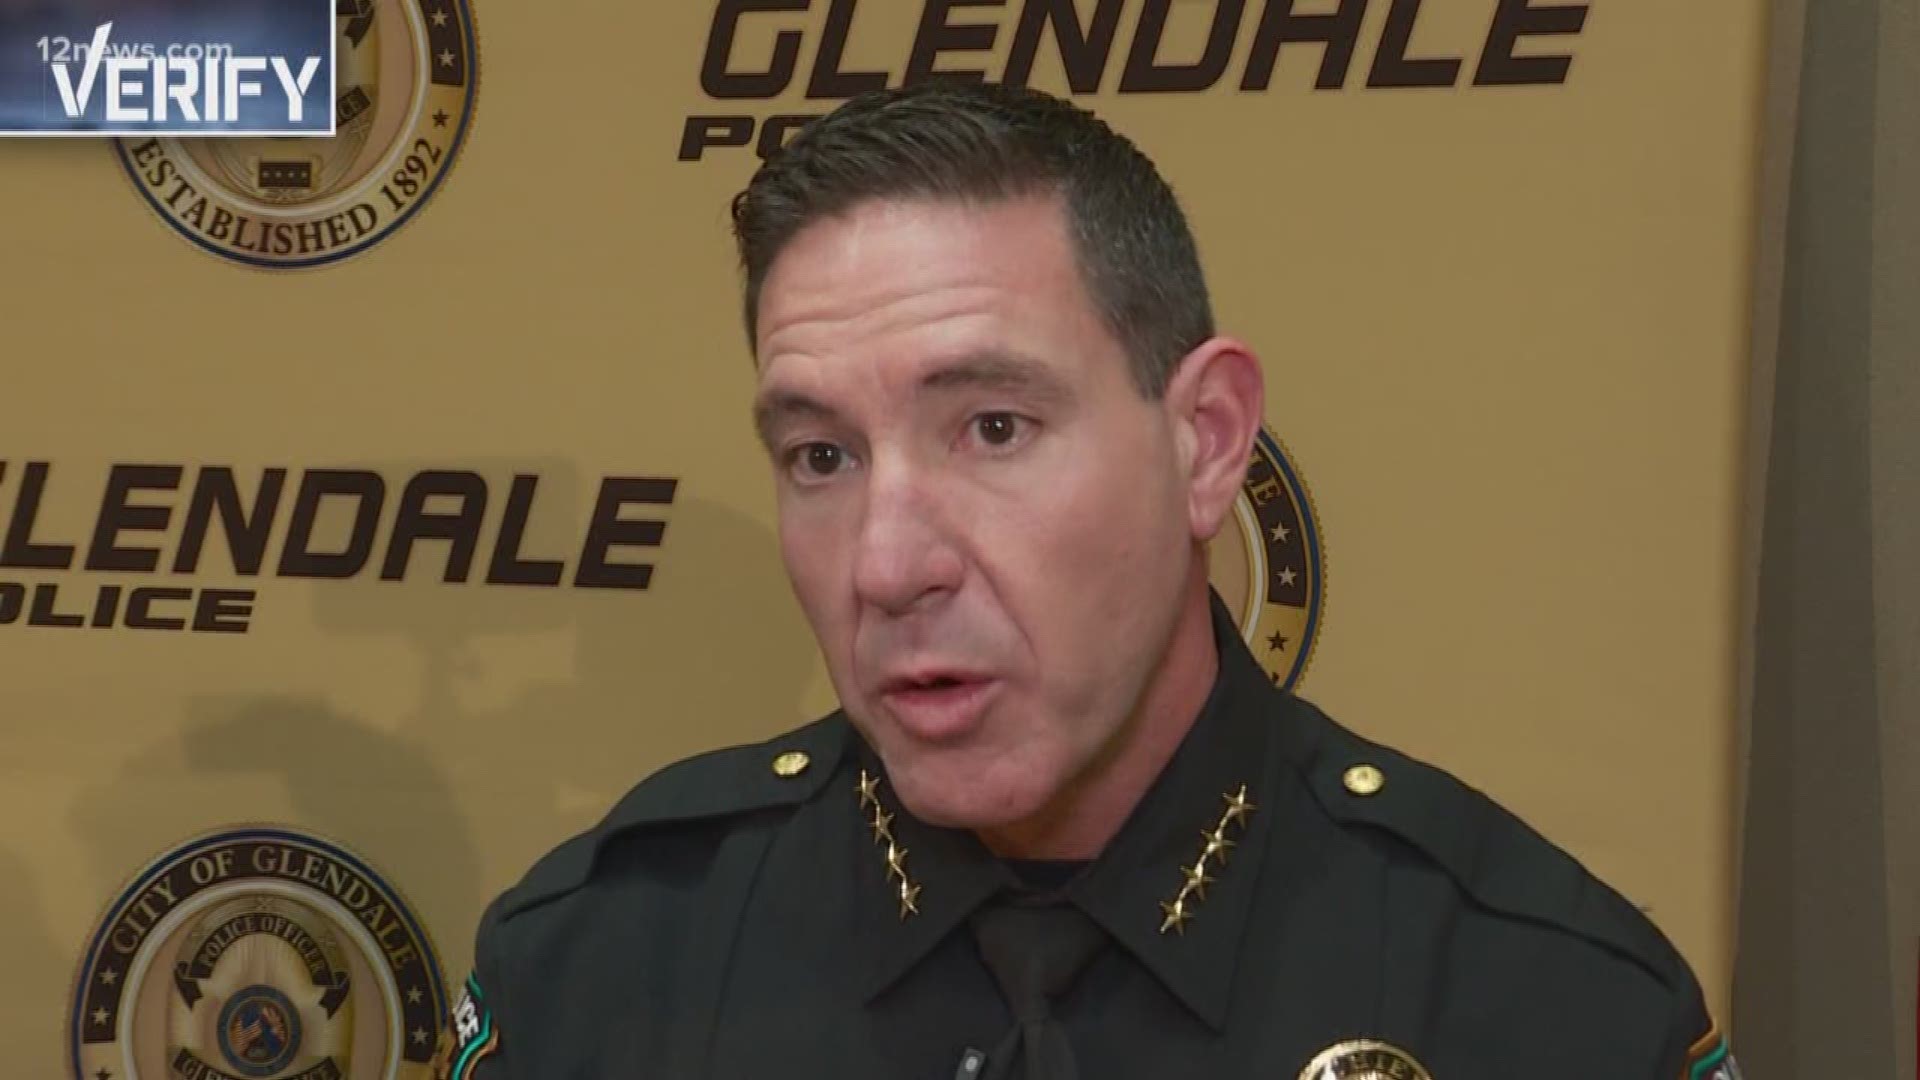 The Glendale Police Department is putting resource officers in all Glendale schools. But what type of impact will that actually have?